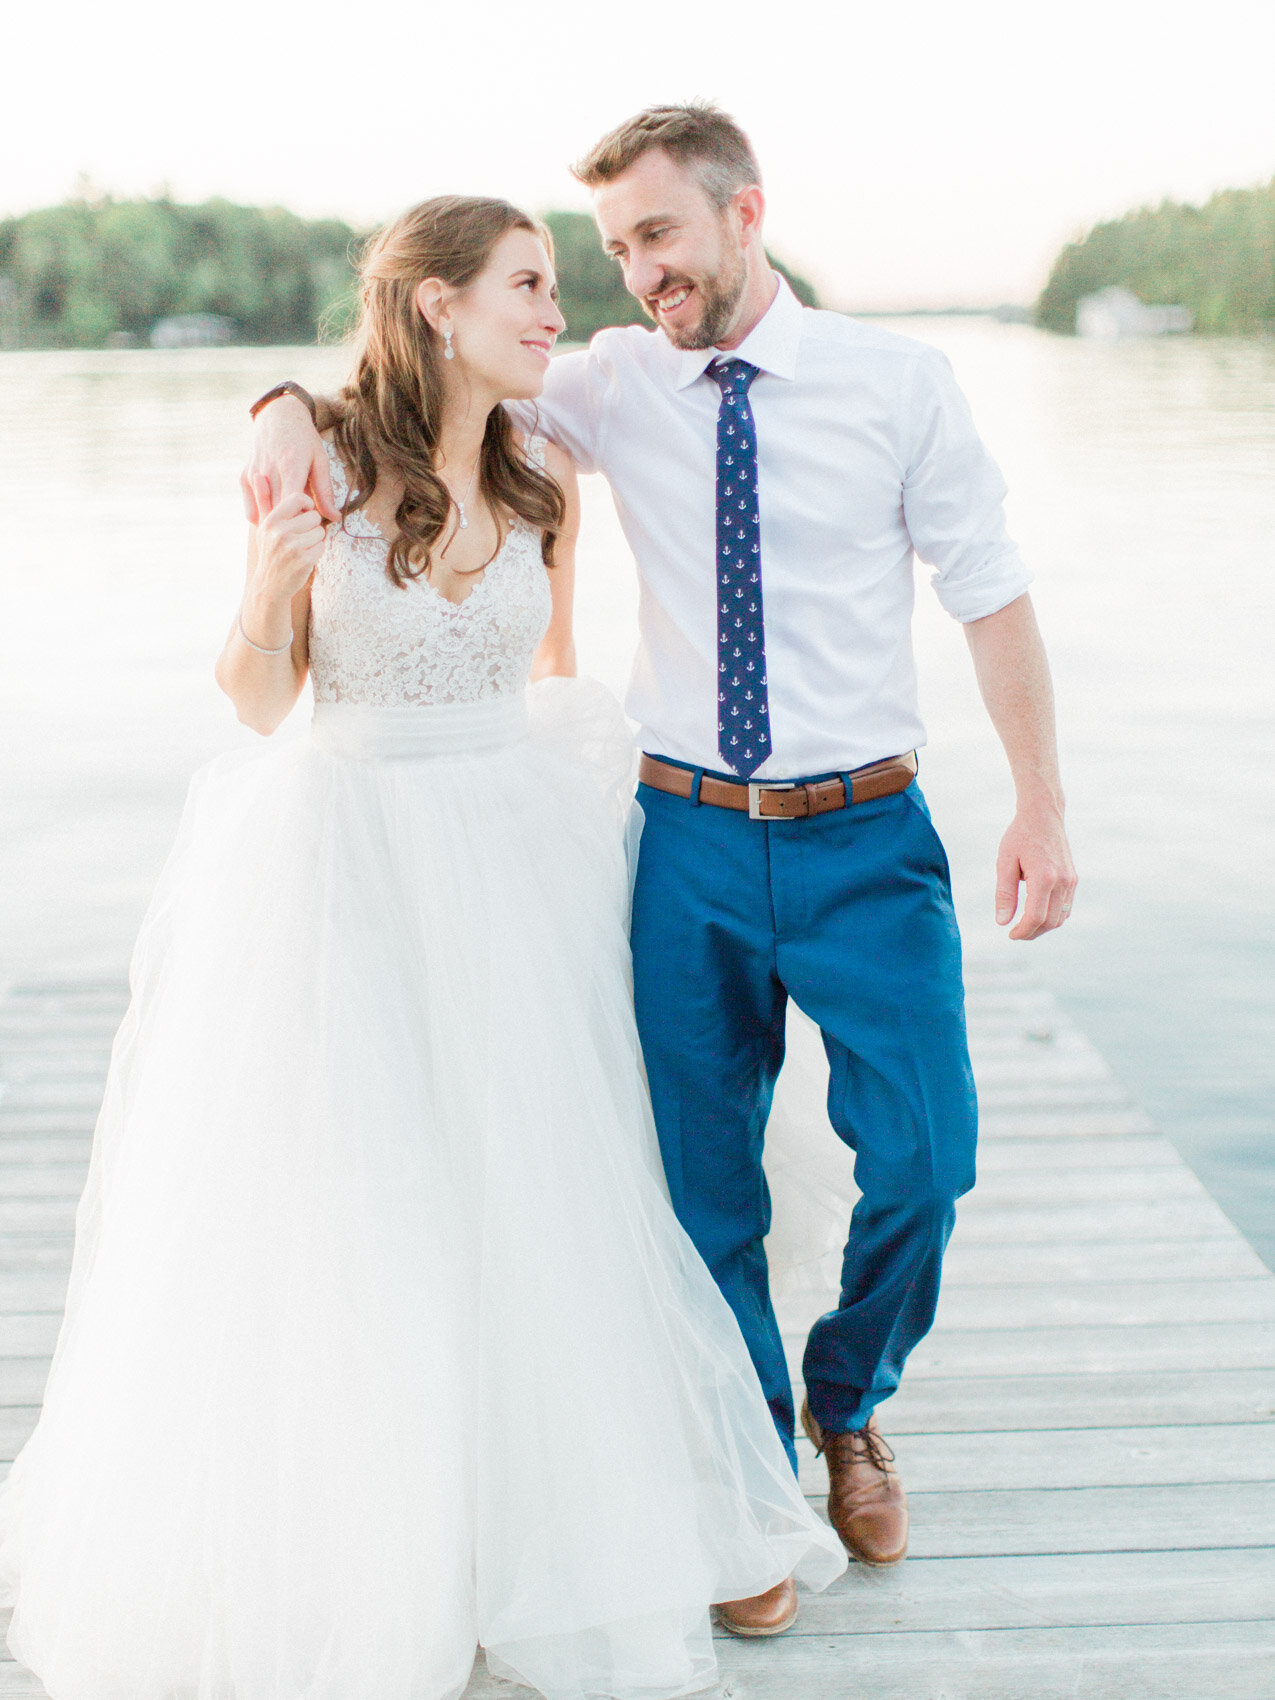 candid and natural wedding photograph in muskoka